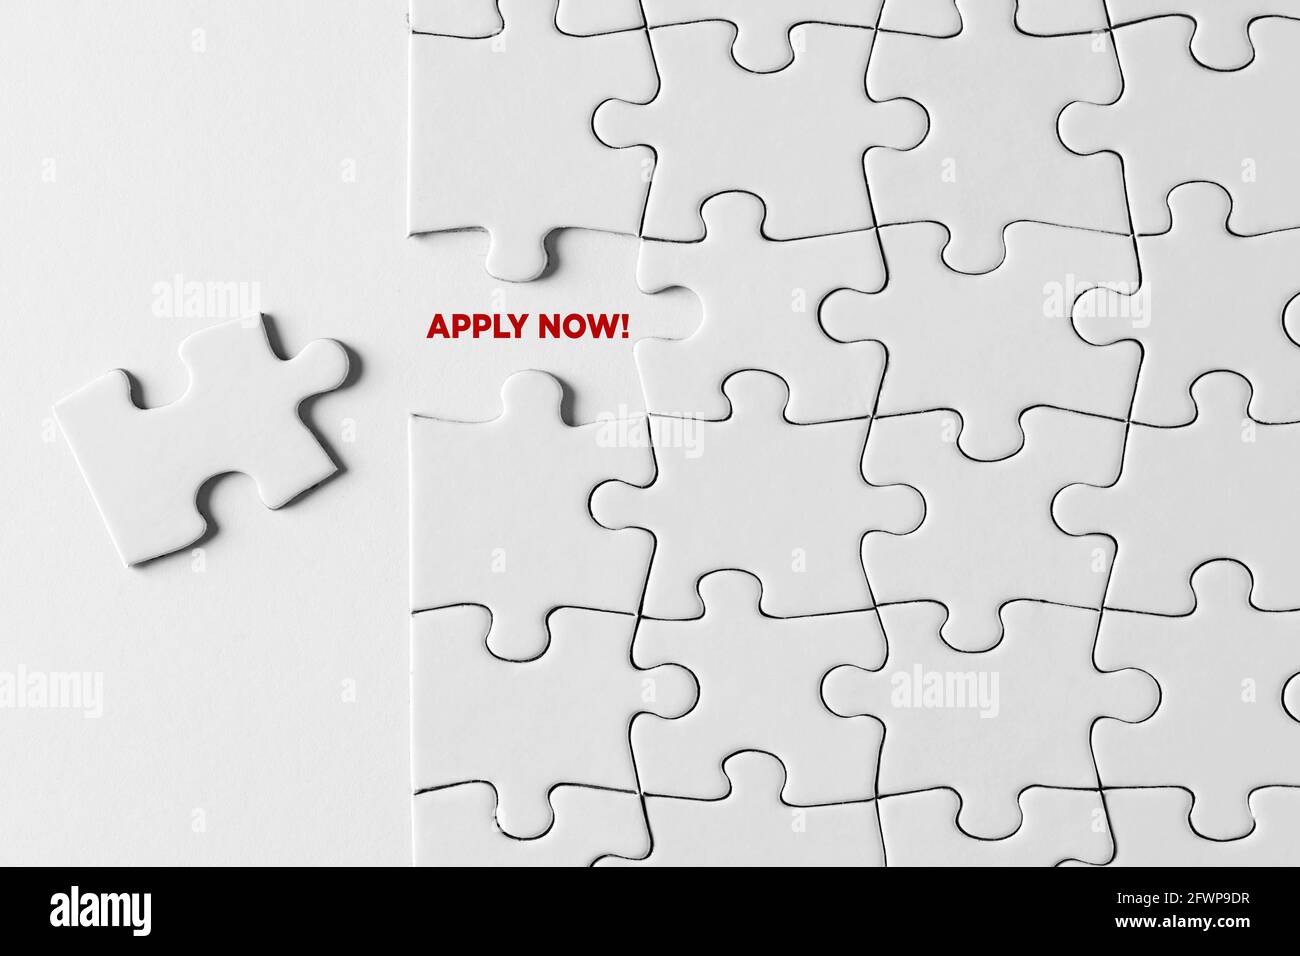 Job application, membership or subscription concept. Apply now message written on missing puzzle piece on white background. Stock Photo